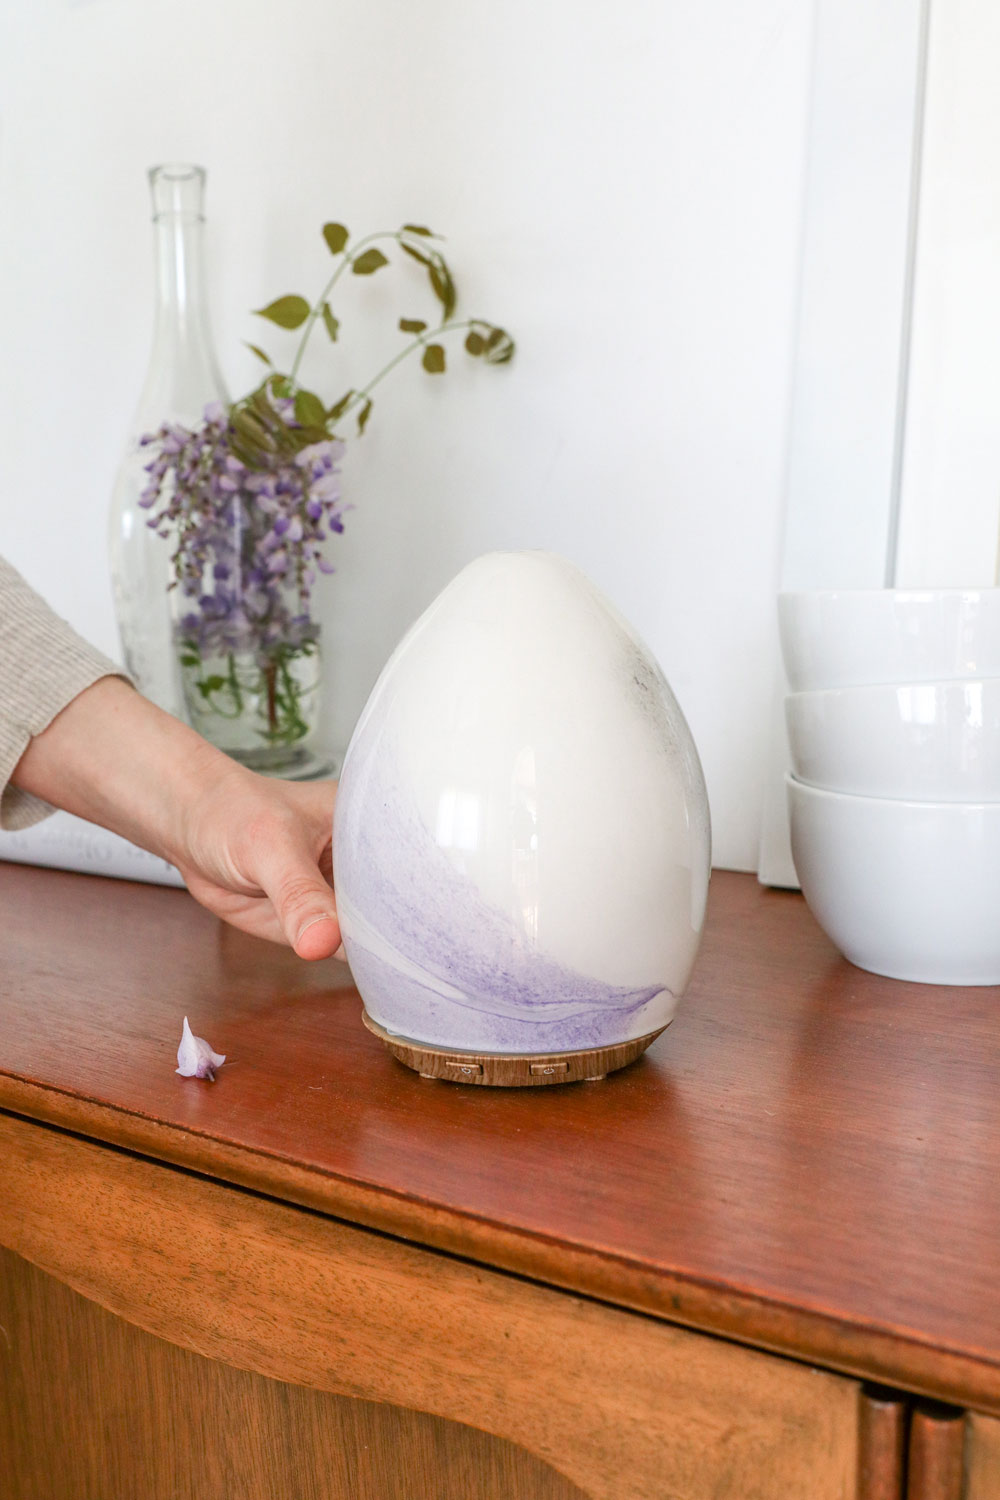 How To Clean an Essential Oil Diffuser